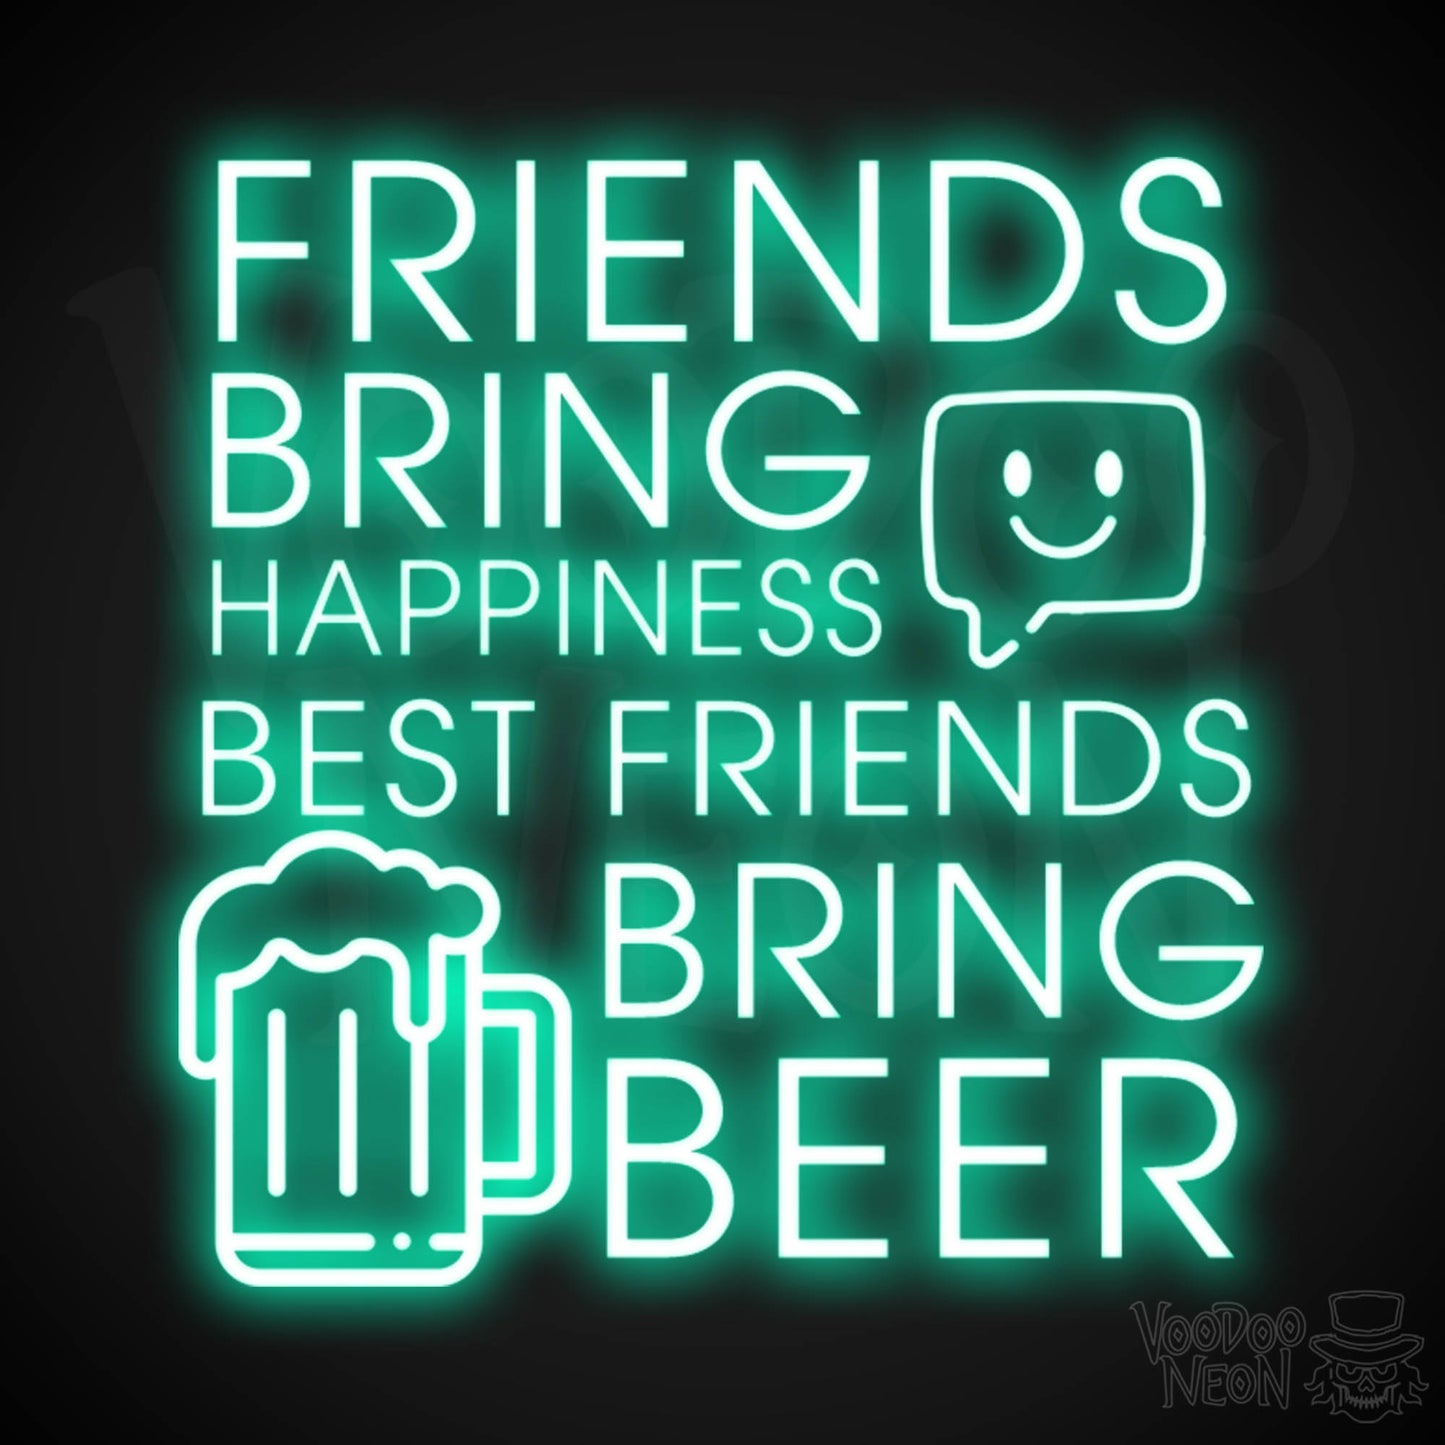 Friends Bring Happiness Best Friends Bring Beer Neon Sign - LED Lights Wall Art - Color Light Green